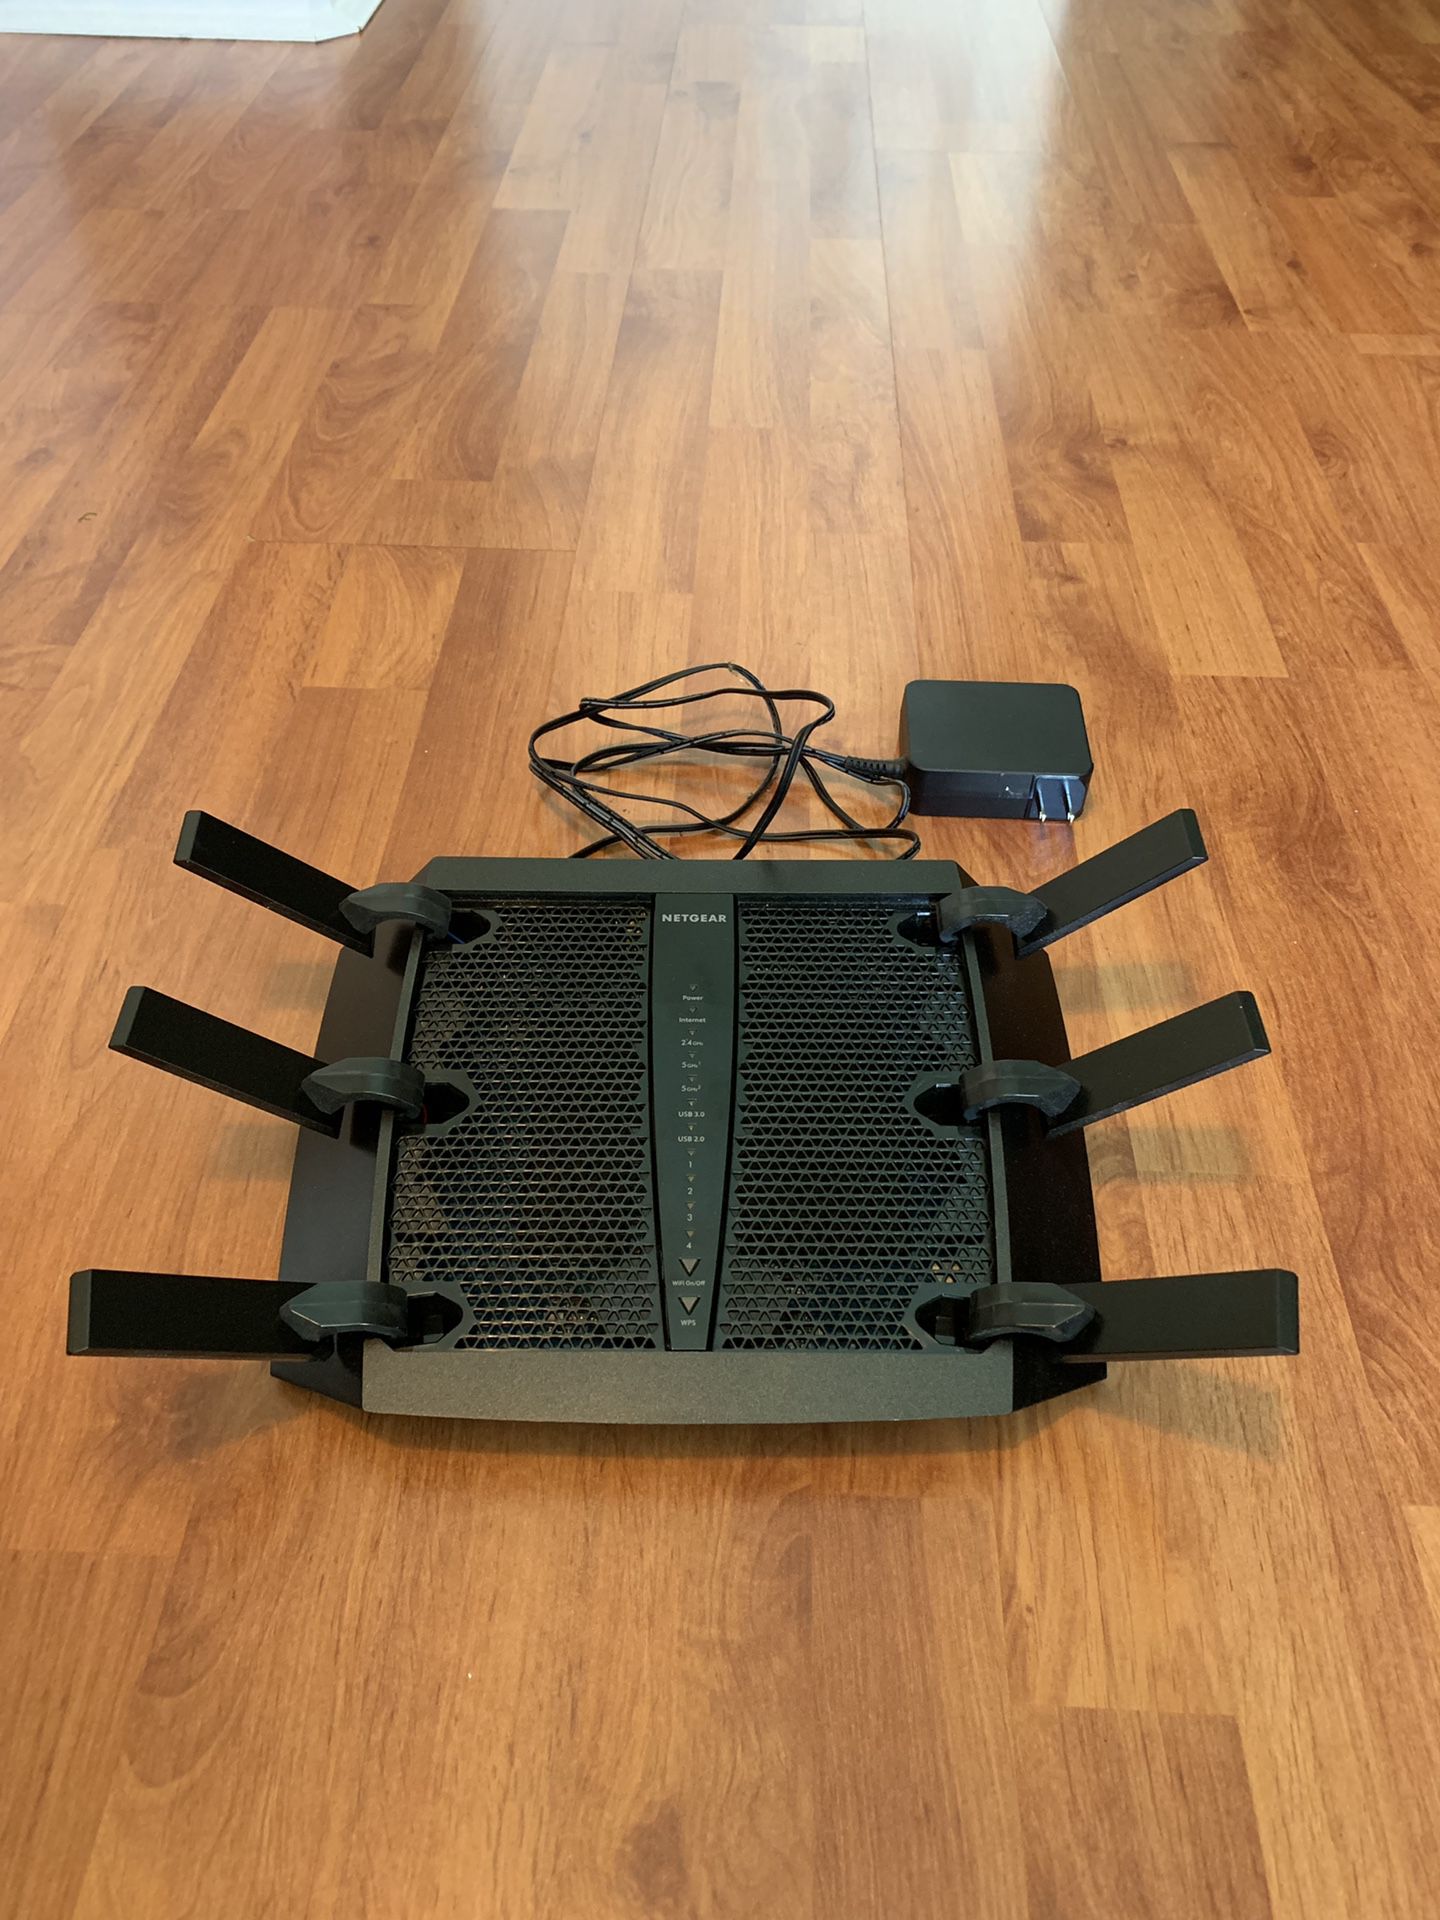 Netgear nighthawk router. Used. Perfect condition.